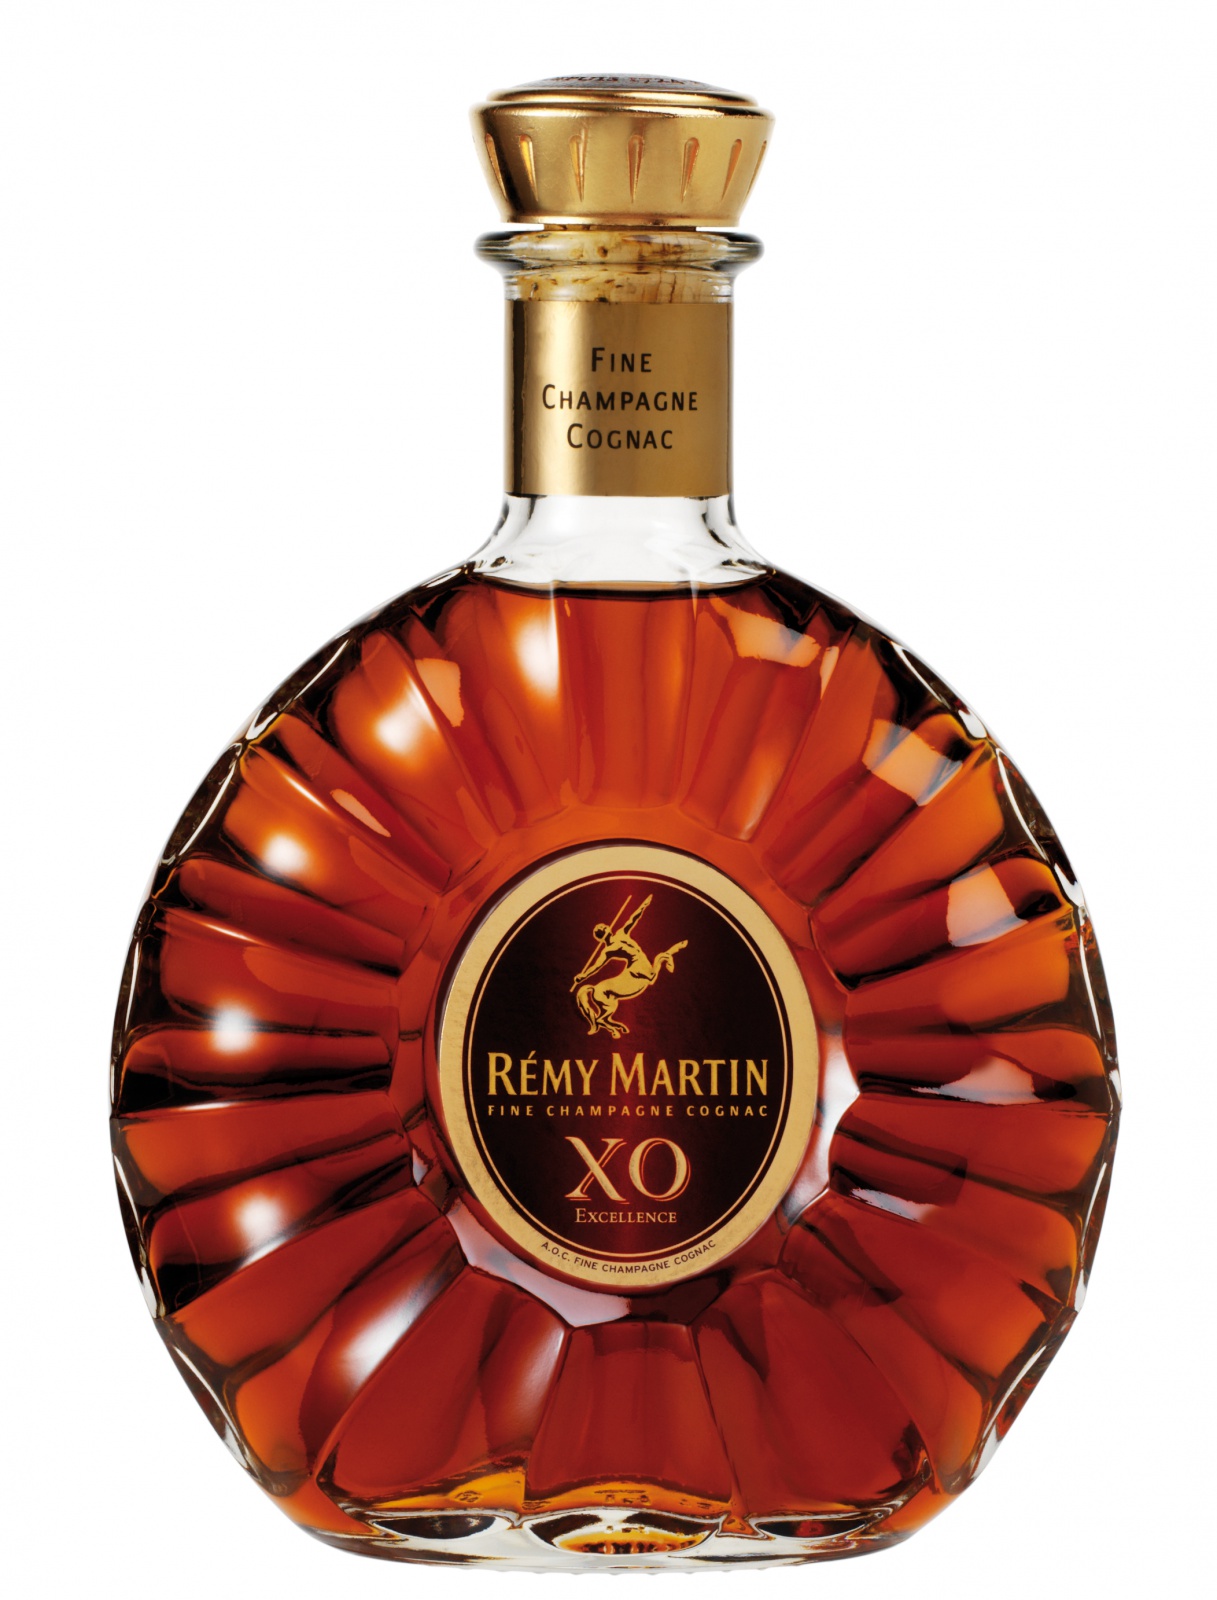 Remy Martin X.O. Excellence 0.7 L